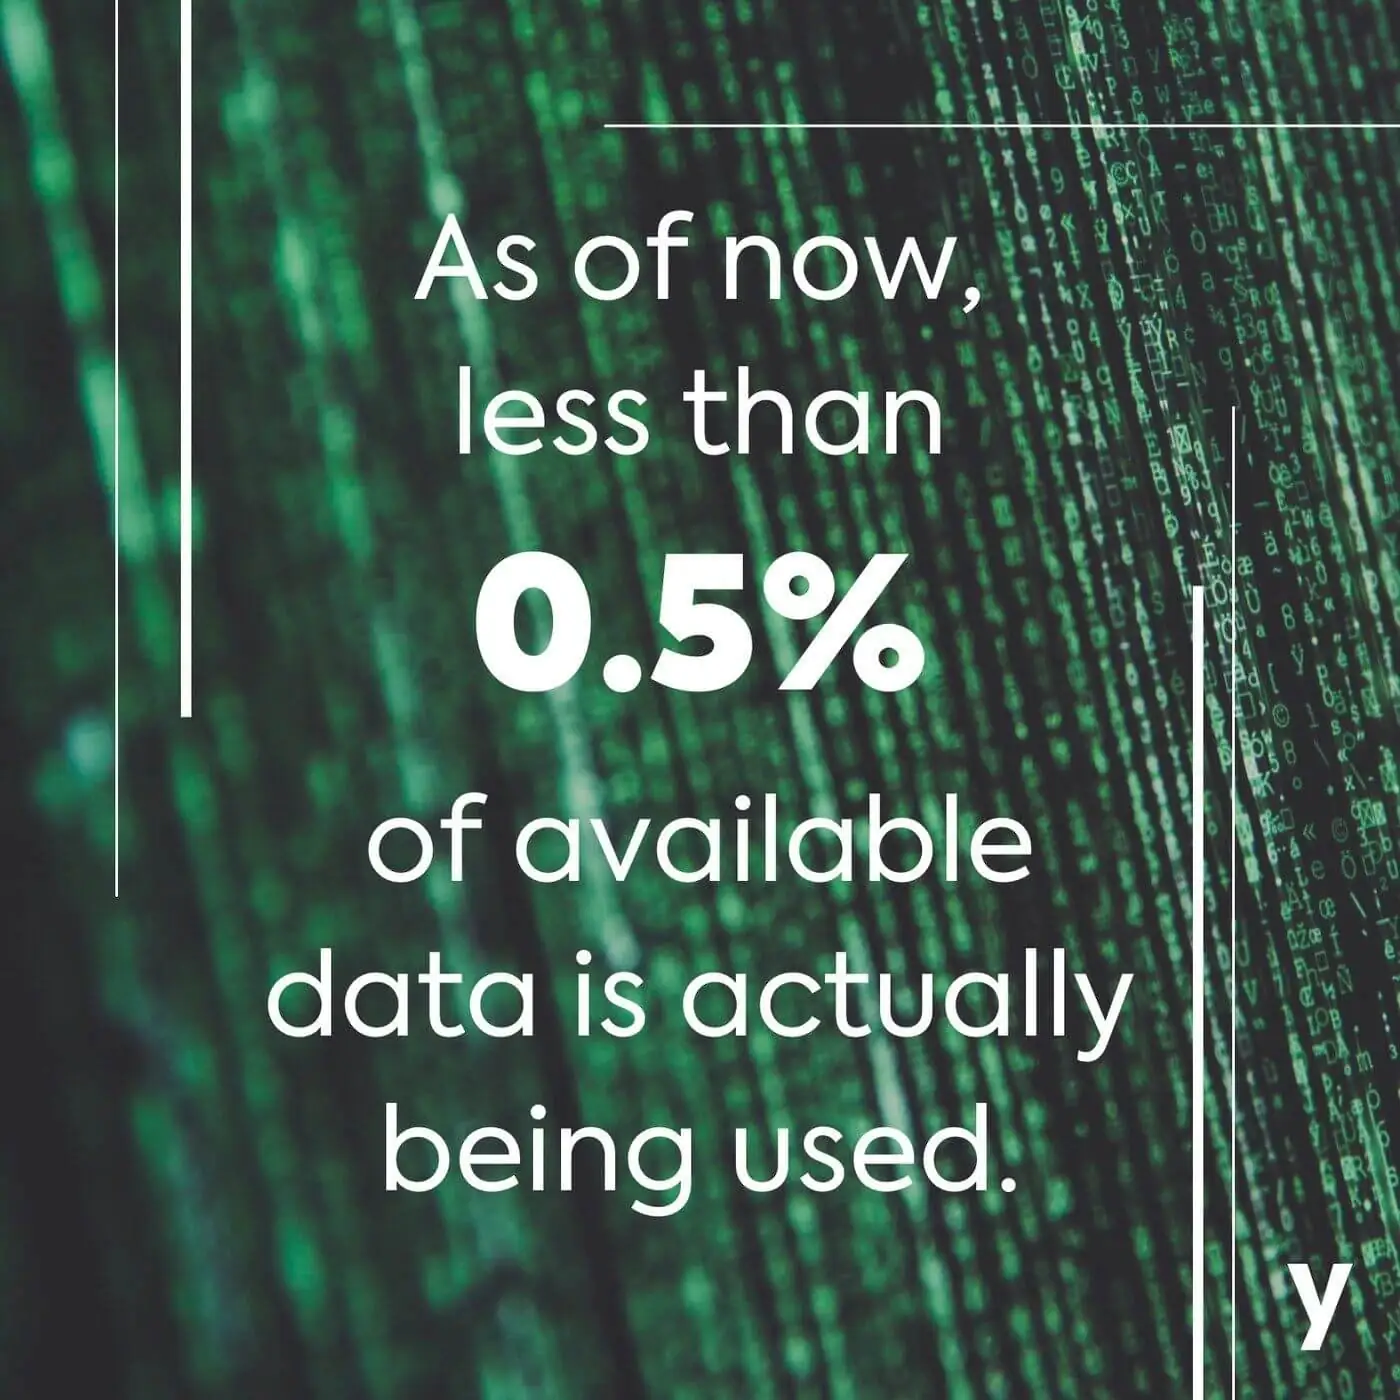 As of now, less than 5 % of available data is actually being used.